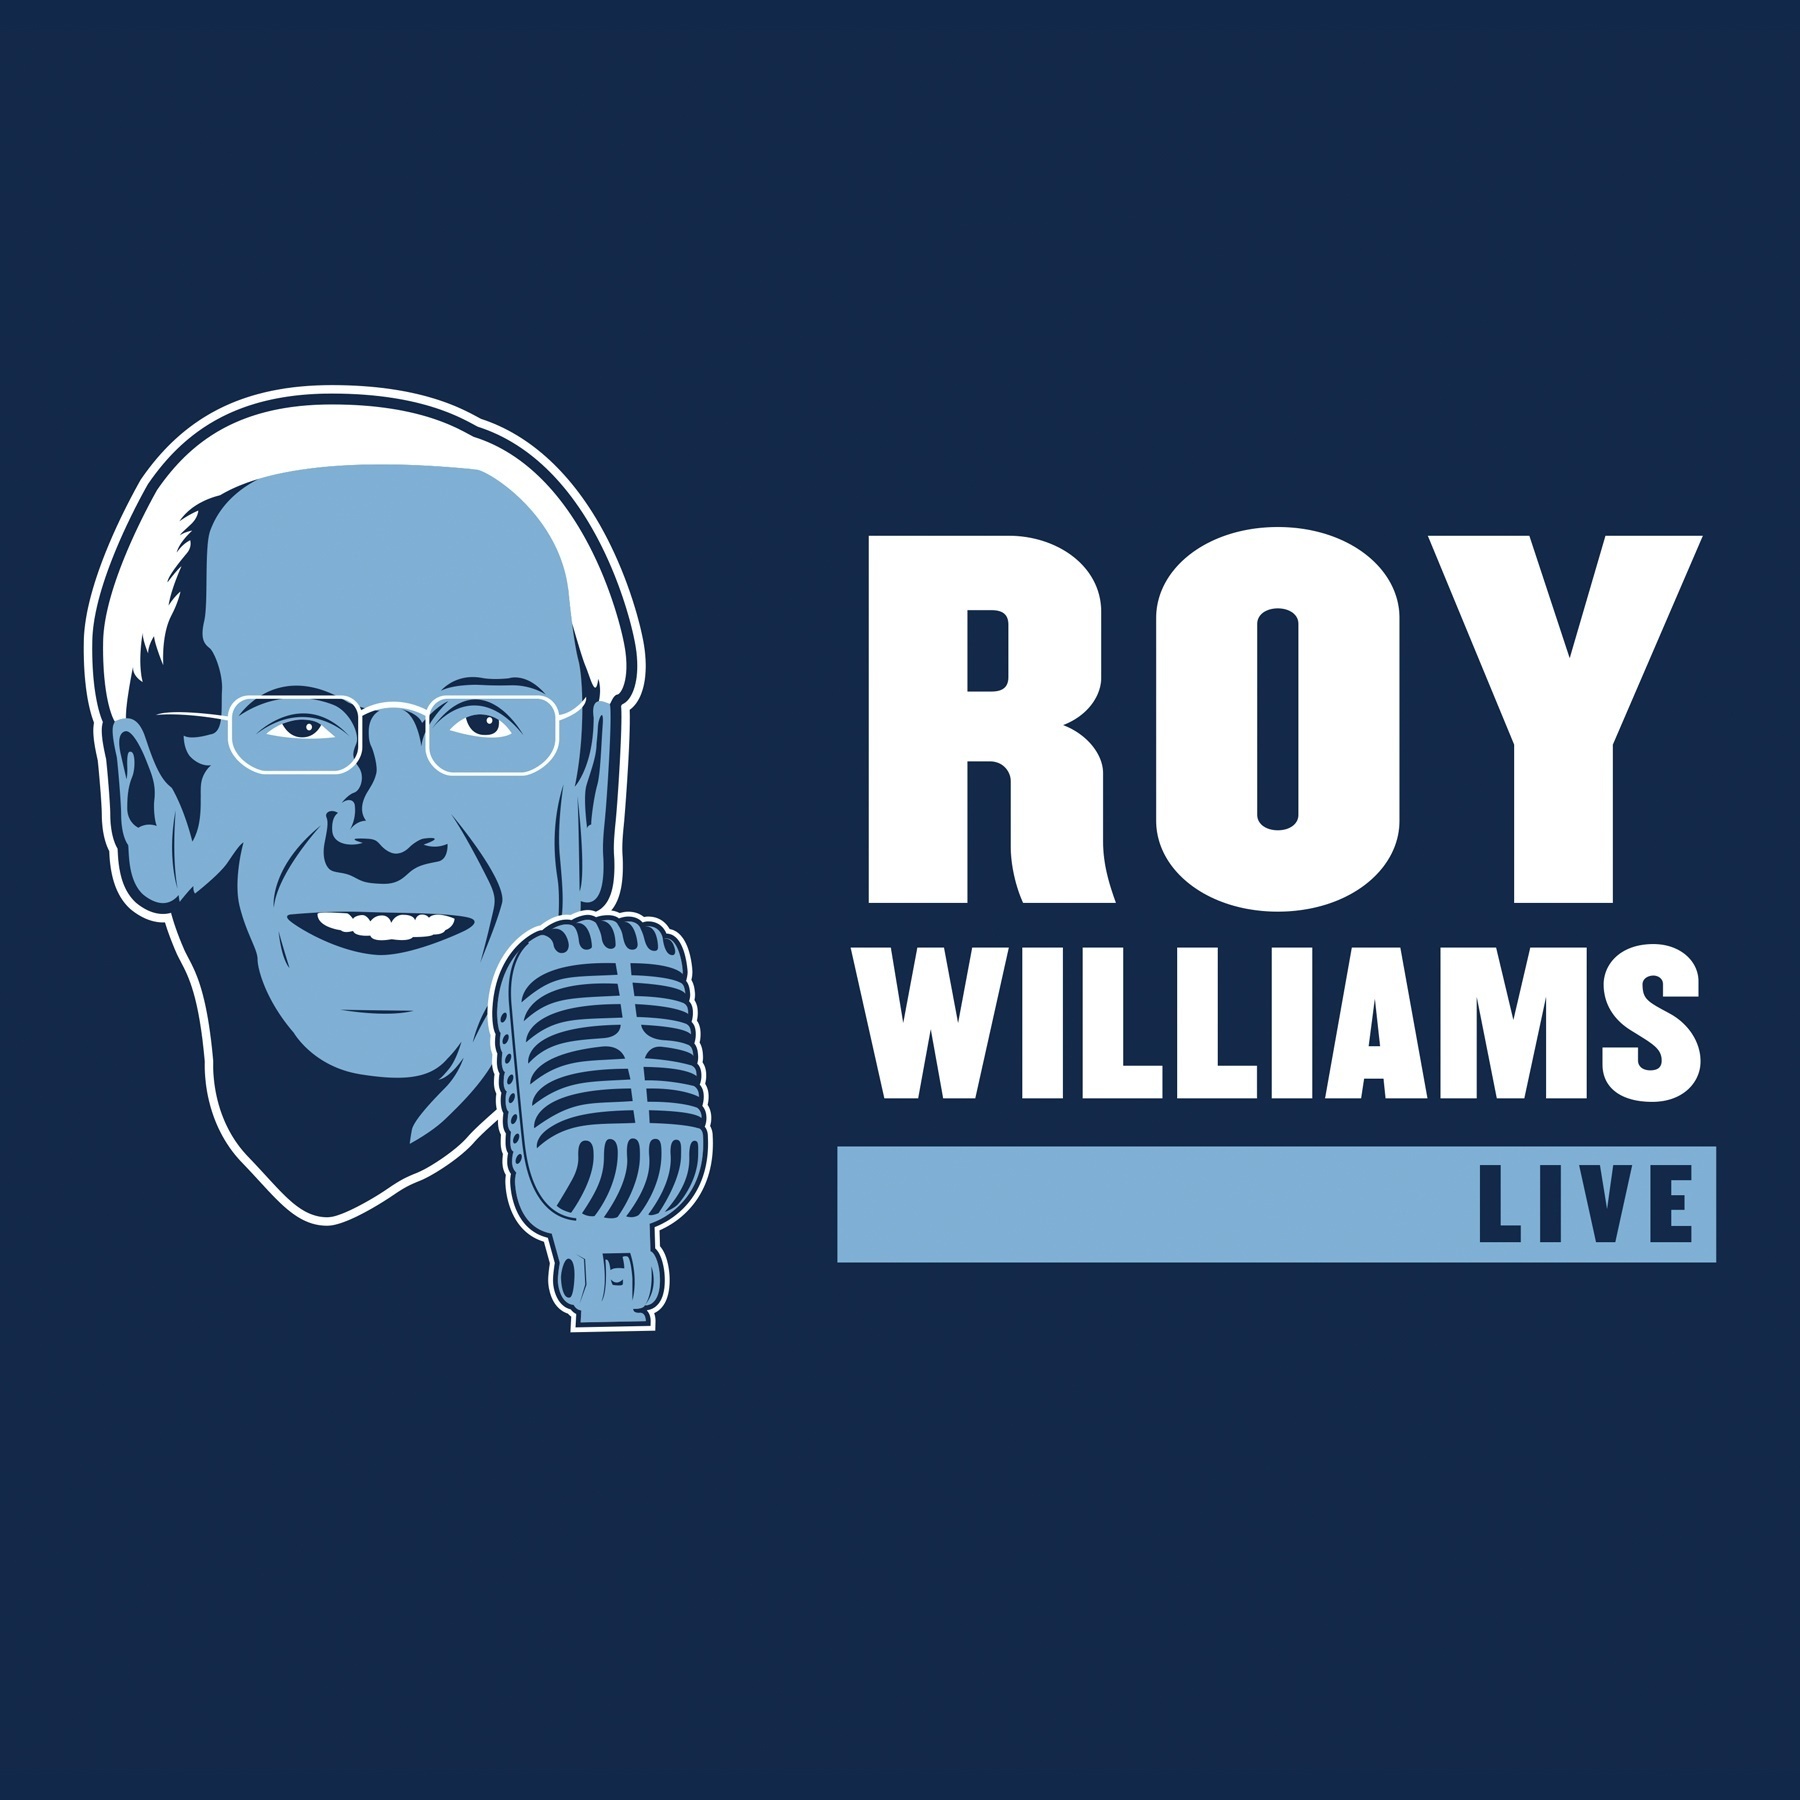 Roy Williams Live from 1-15-18